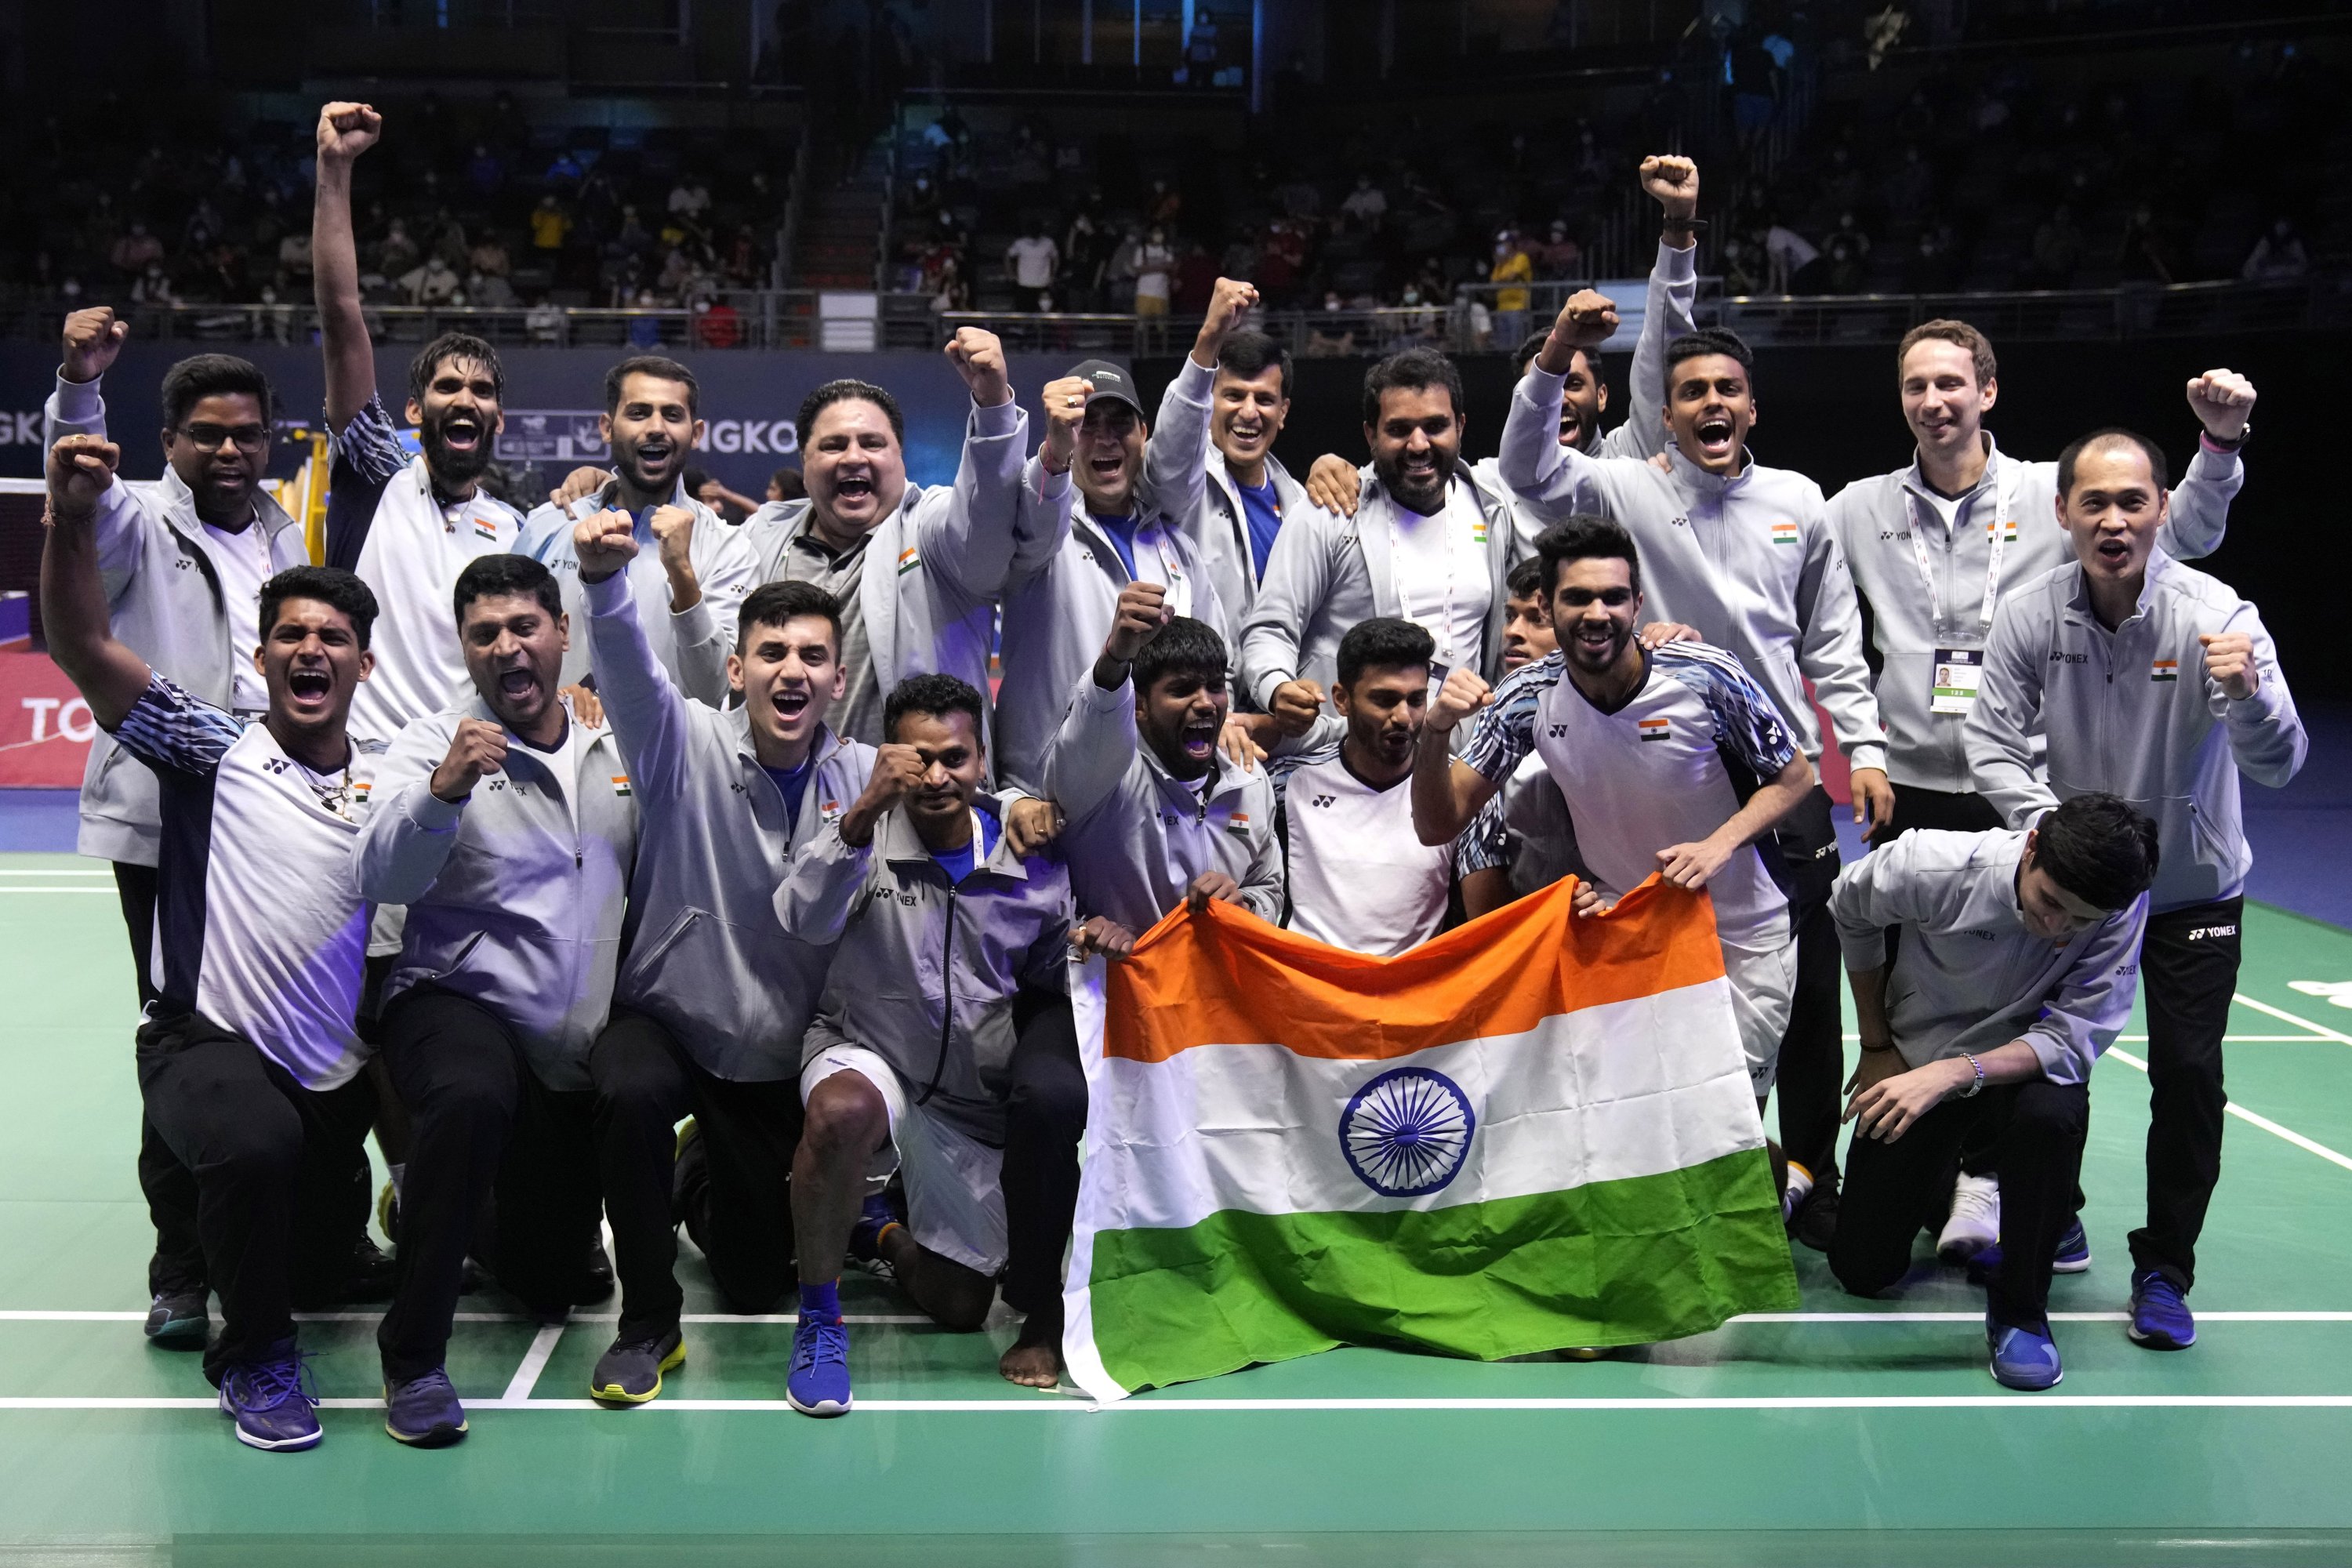 India basks in badminton glory as years of hard work pays off Daily Sabah